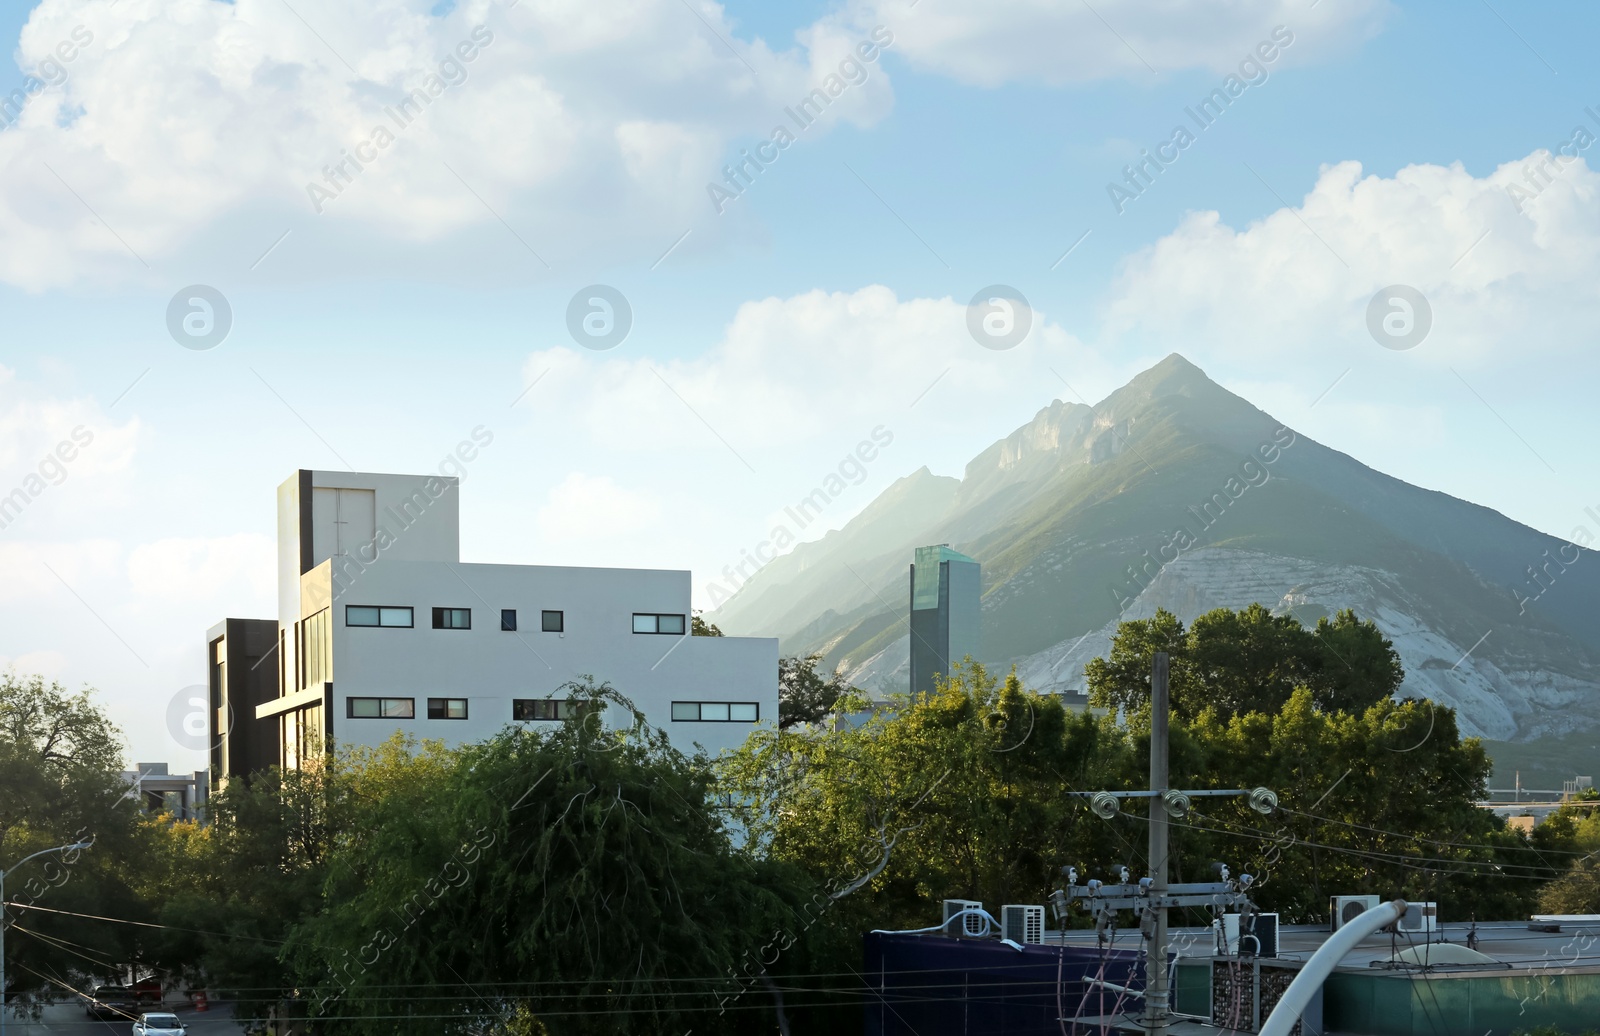 Photo of Picturesque view of cityscape with beautiful buildings and trees near mountains